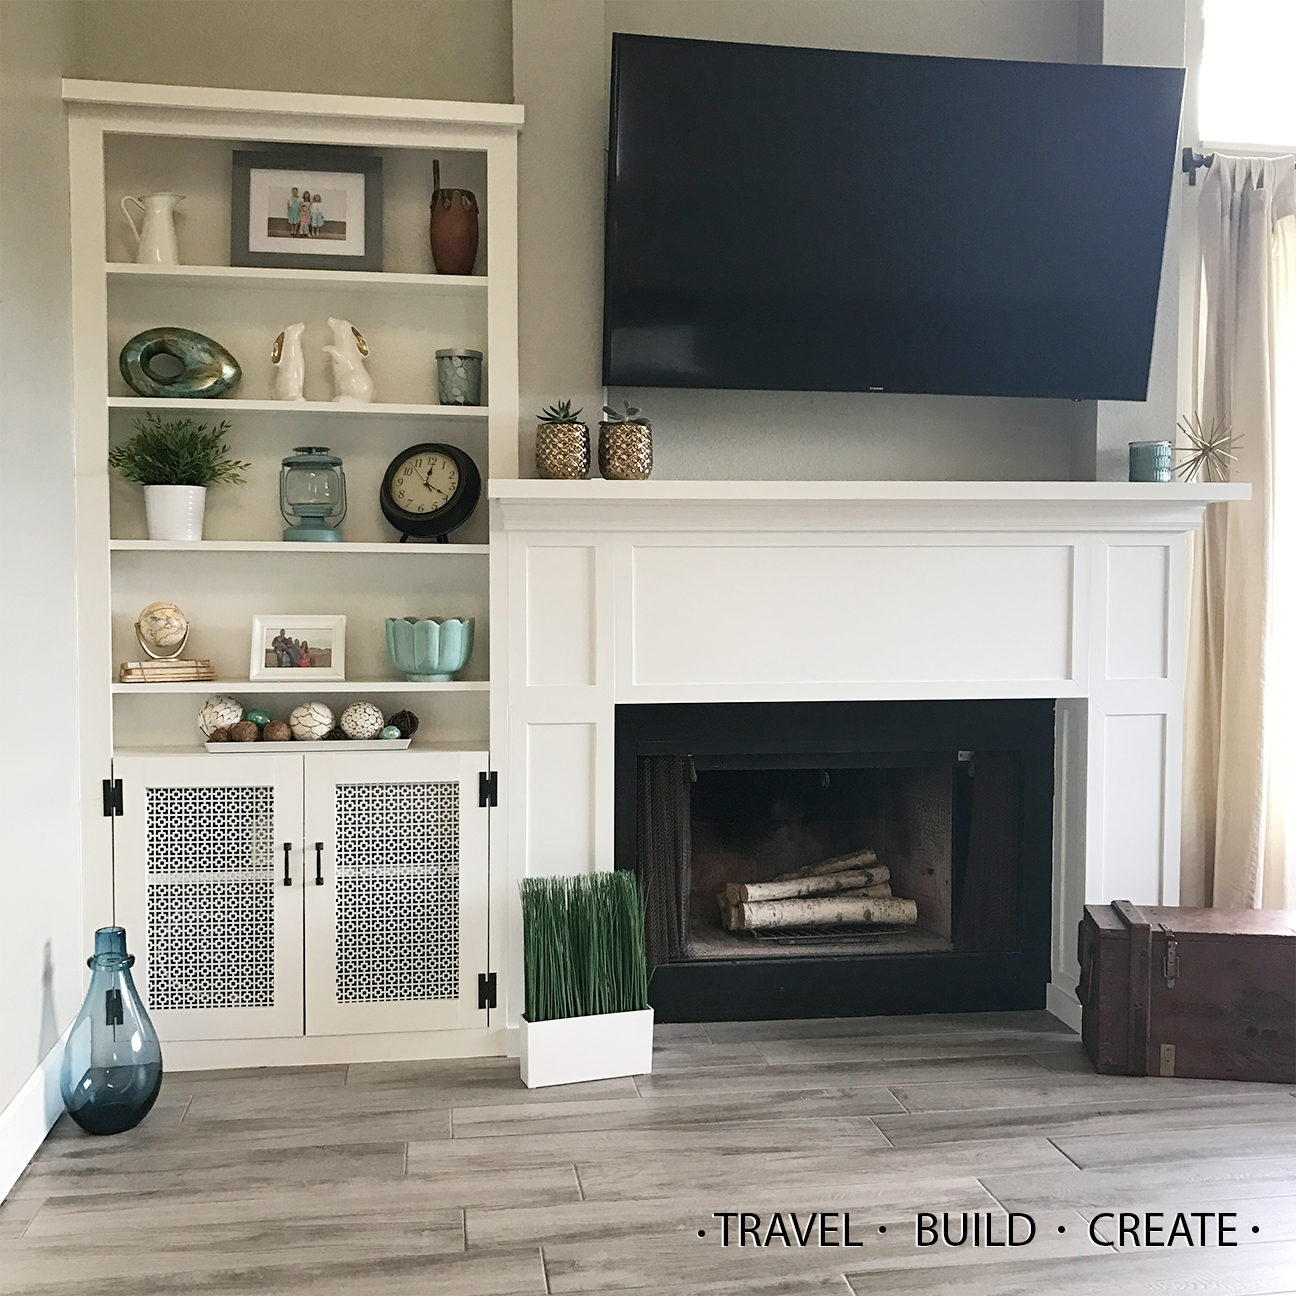 Diy Fireplace Surround And Built In, How To Build Bookcase Around Fireplace